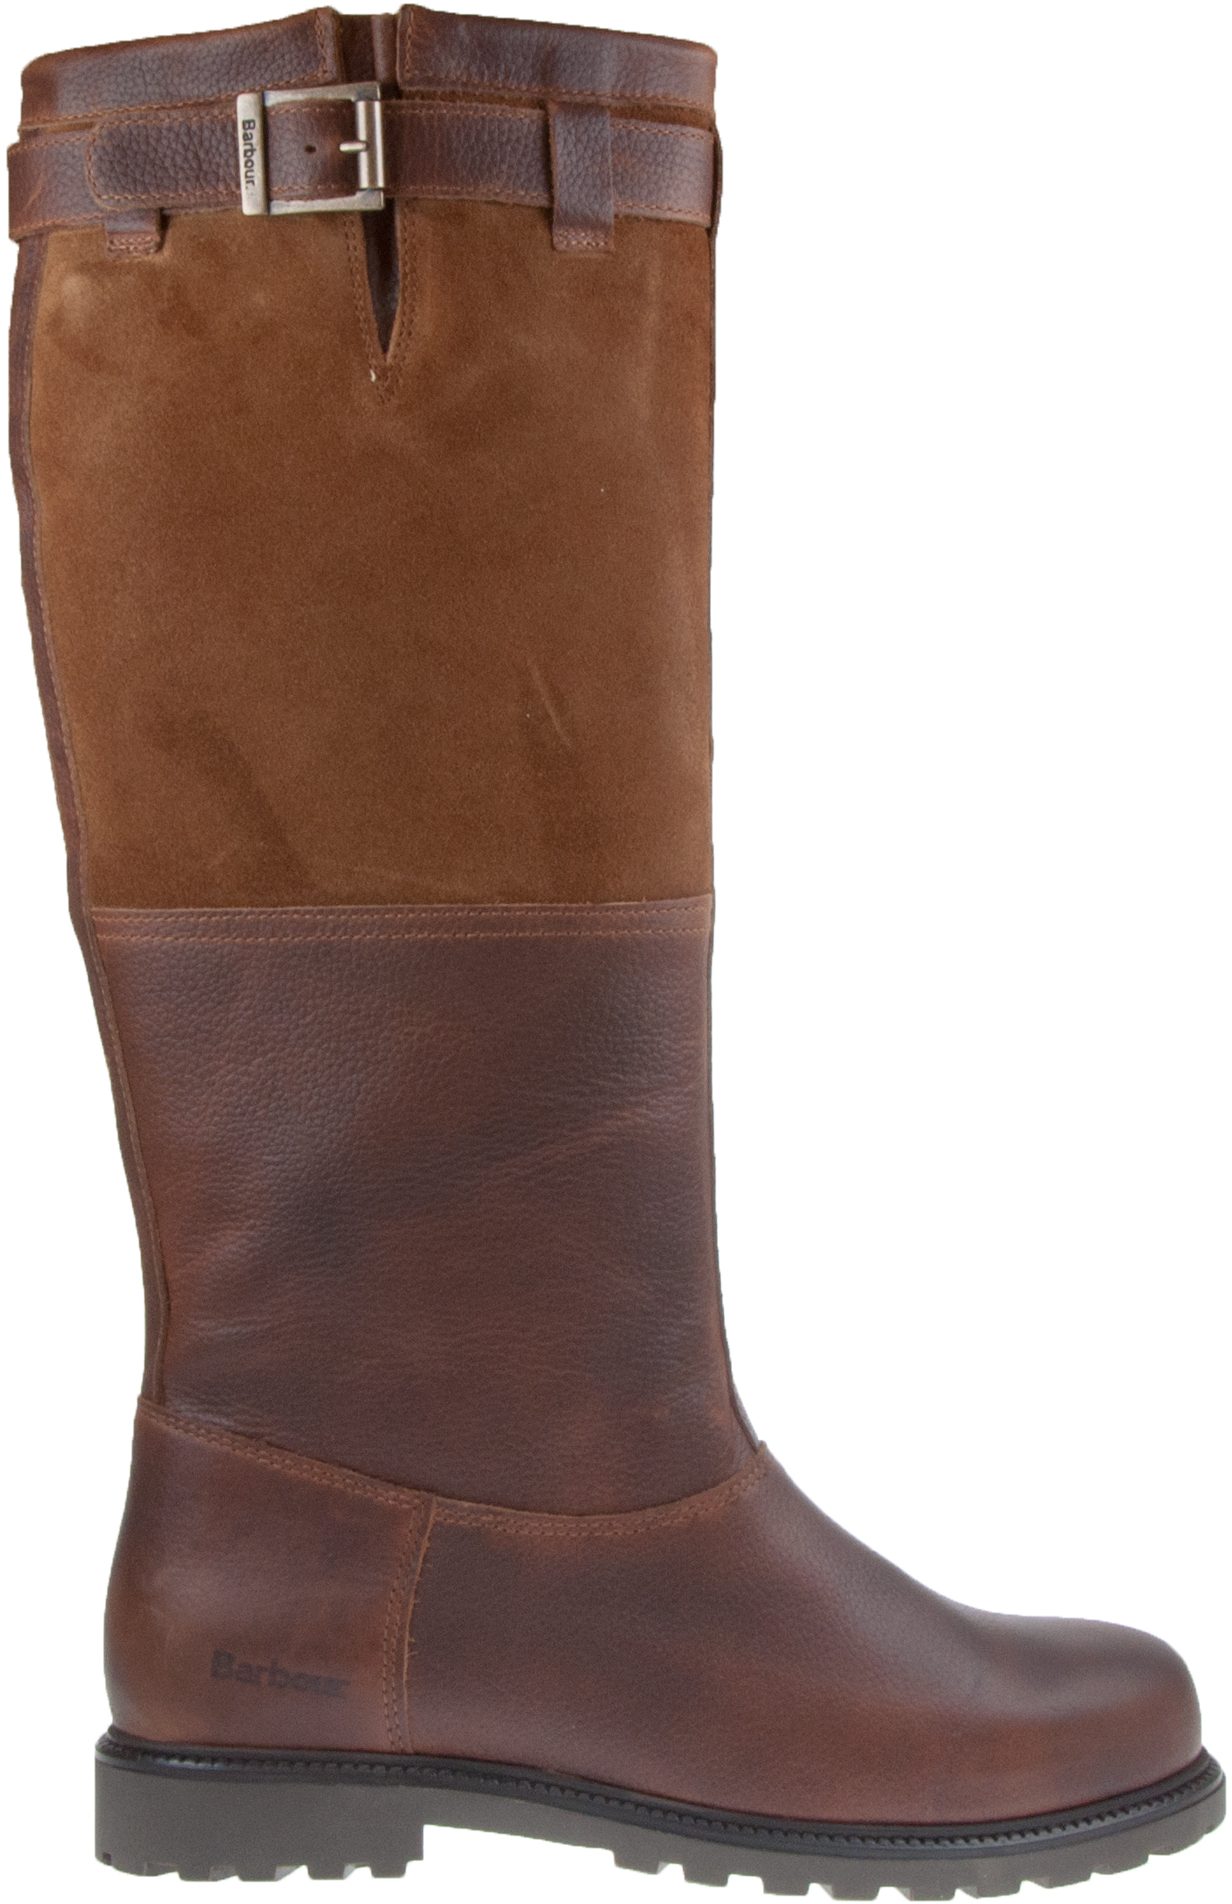 Barbour Acorn Brown LFO0447BR52 - Knee High Boots - Humphries Shoes